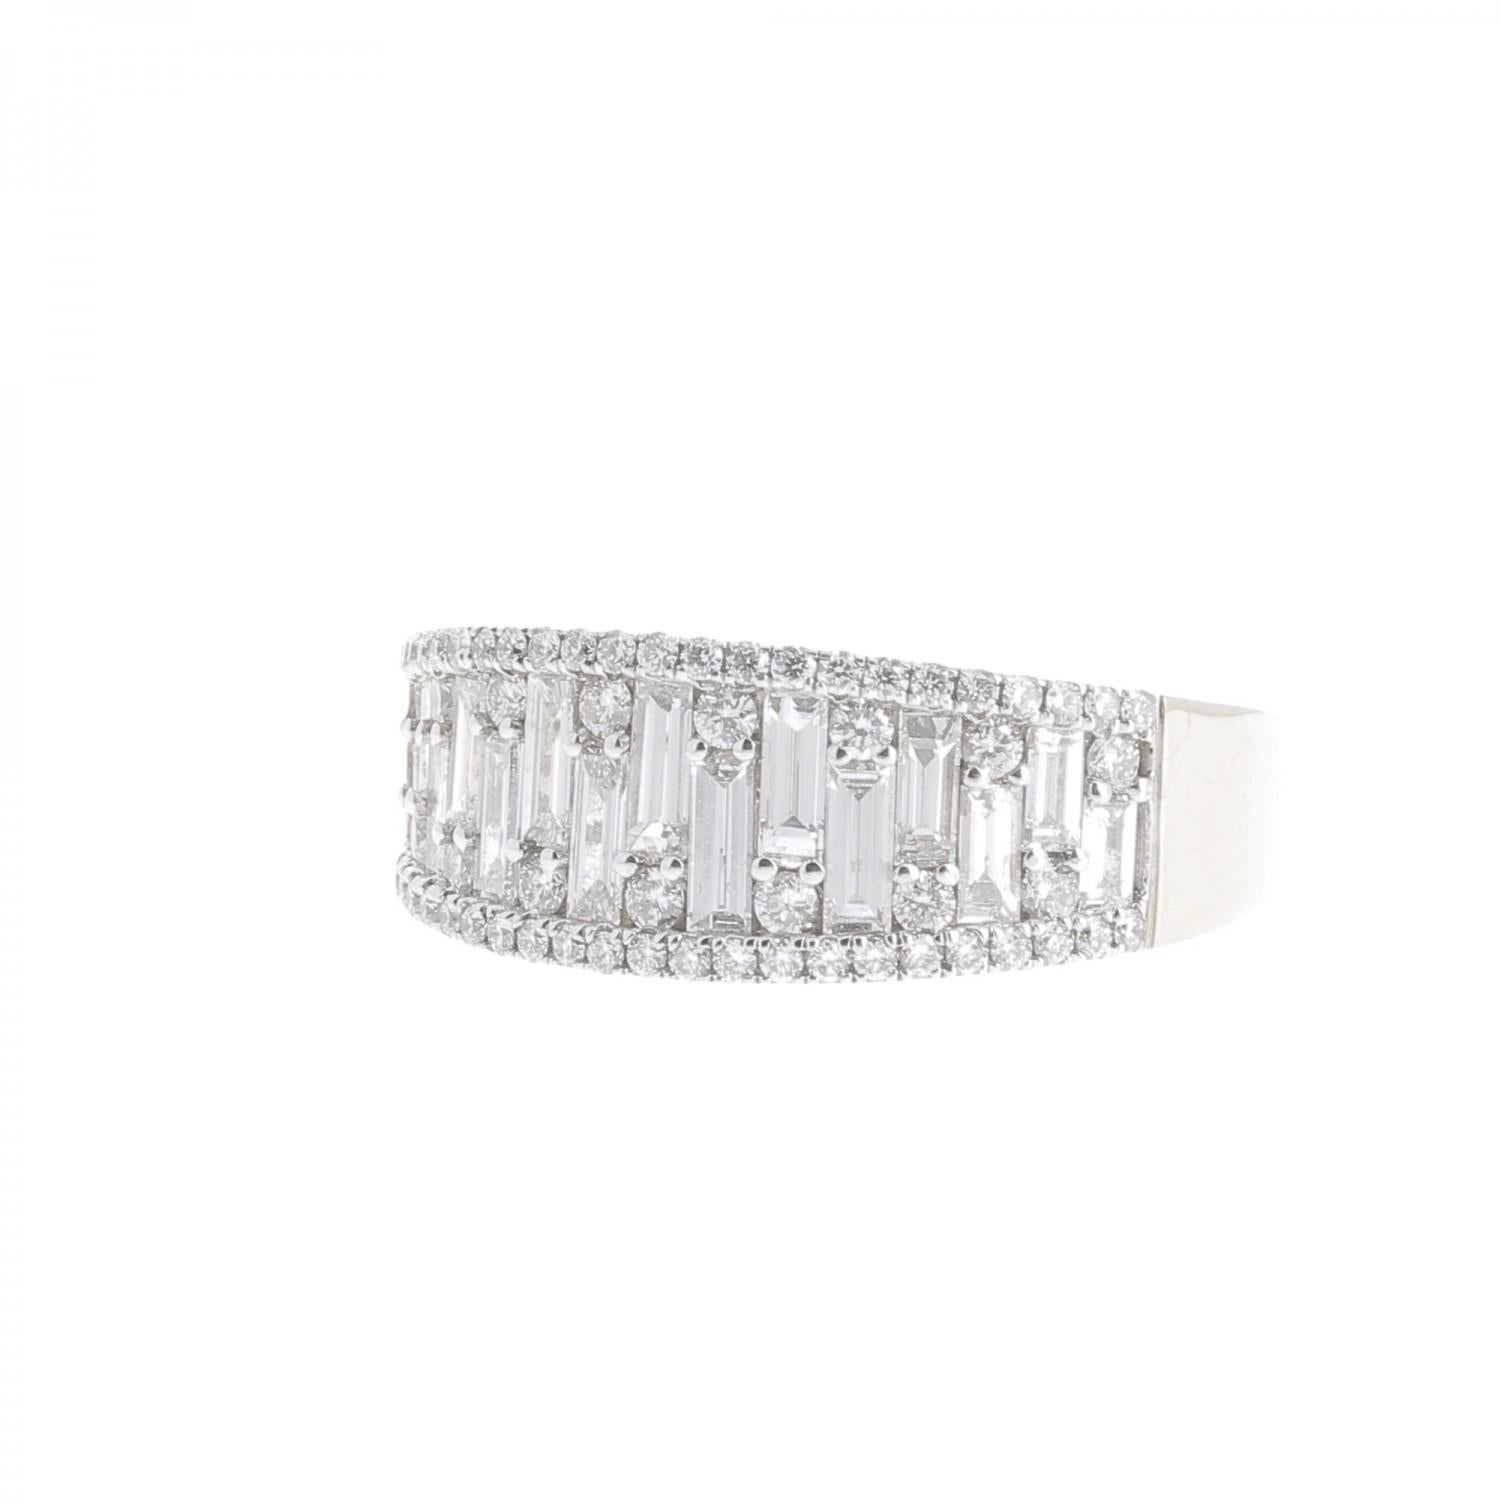 A wonderful Diamond Ring set with Round and Baguettes Diamonds weighing 1.18 Carats.
The Diamonds are GVS quality.
The Diamond Cocktail Ring is in 18K White Gold.
The ring weight 4.79 Grams.
The ring size is 6 ½ US and can be size
The Cocktail ring